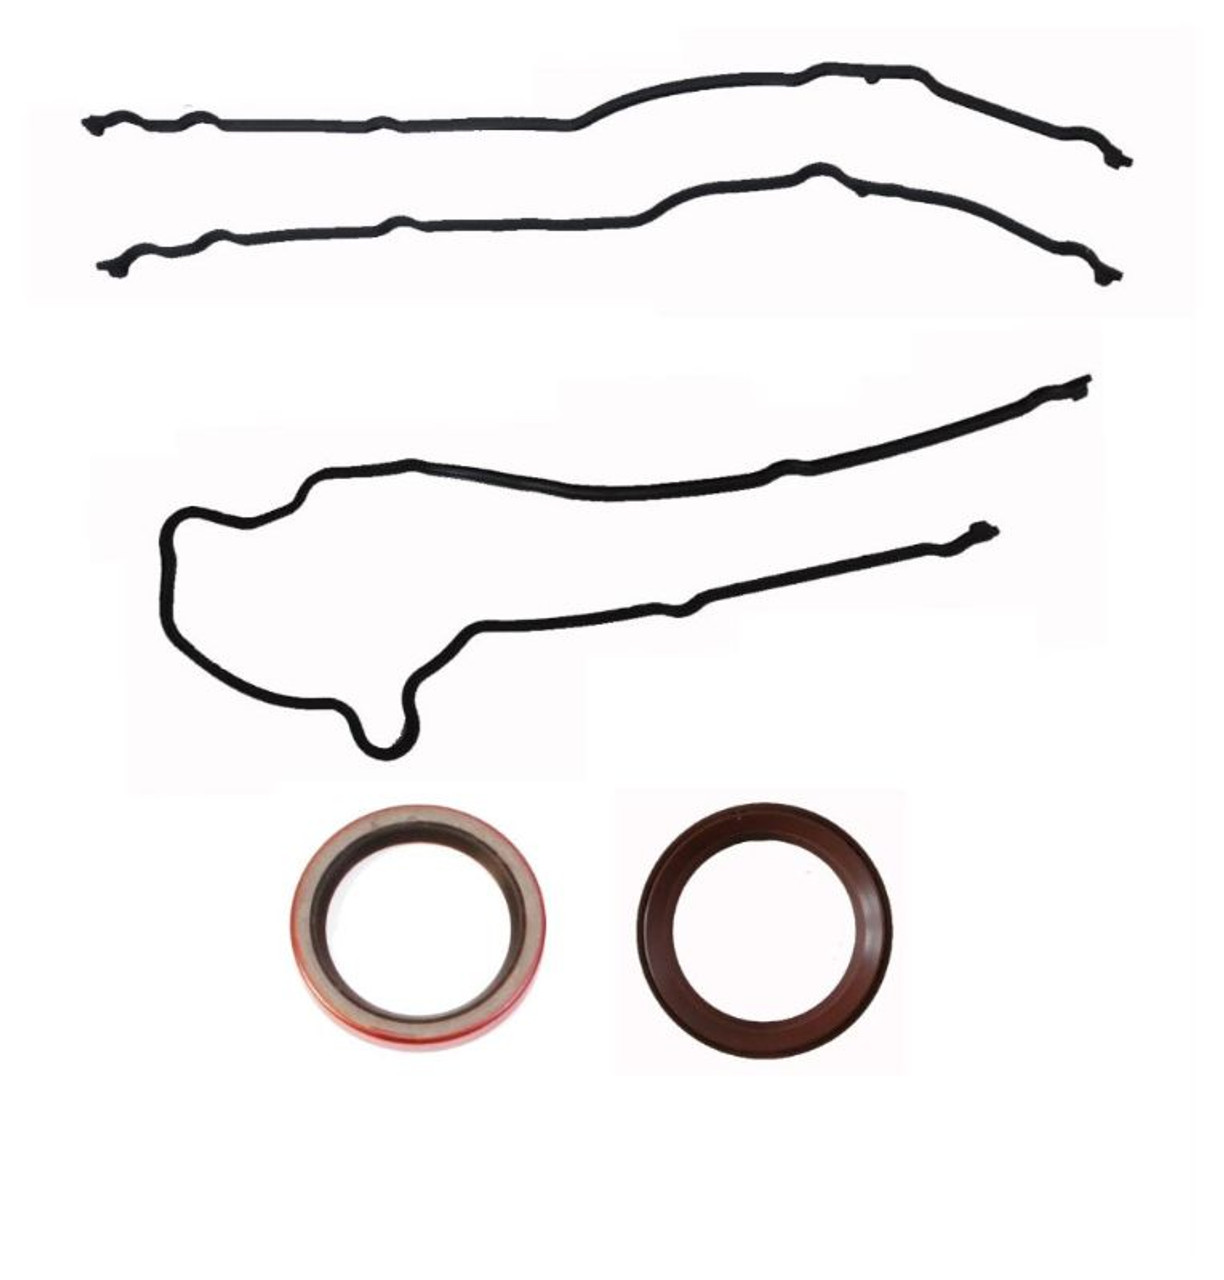 2003 Ford F-250 Super Duty 6.8L Engine Timing Cover Gasket Set TCF330-A -164